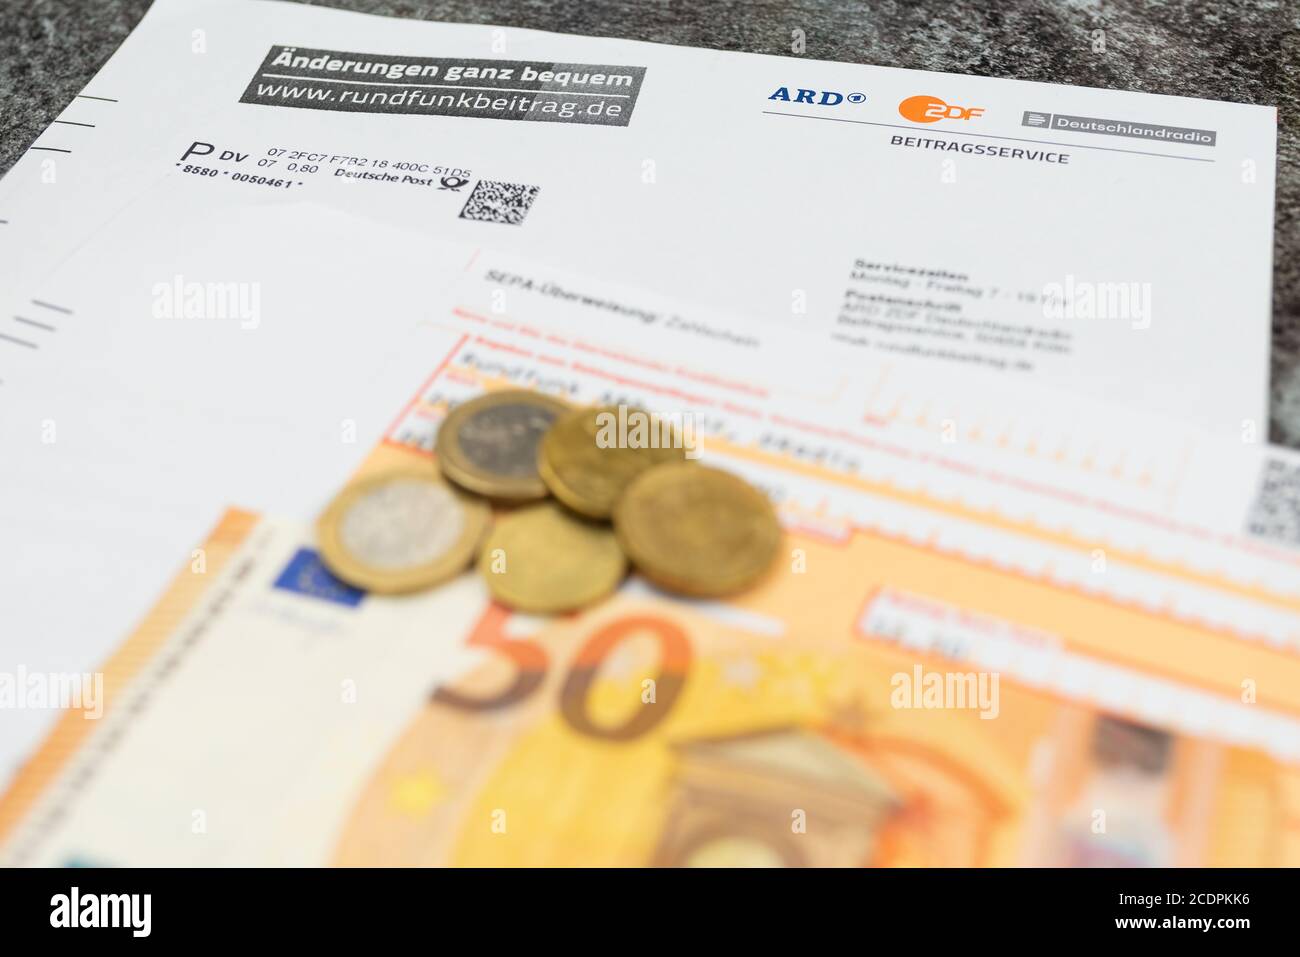 2020-08-29 Hamburg, Germany: close-up of quarterly invoice for tevevision and radio license fee and remittance slip on table Stock Photo